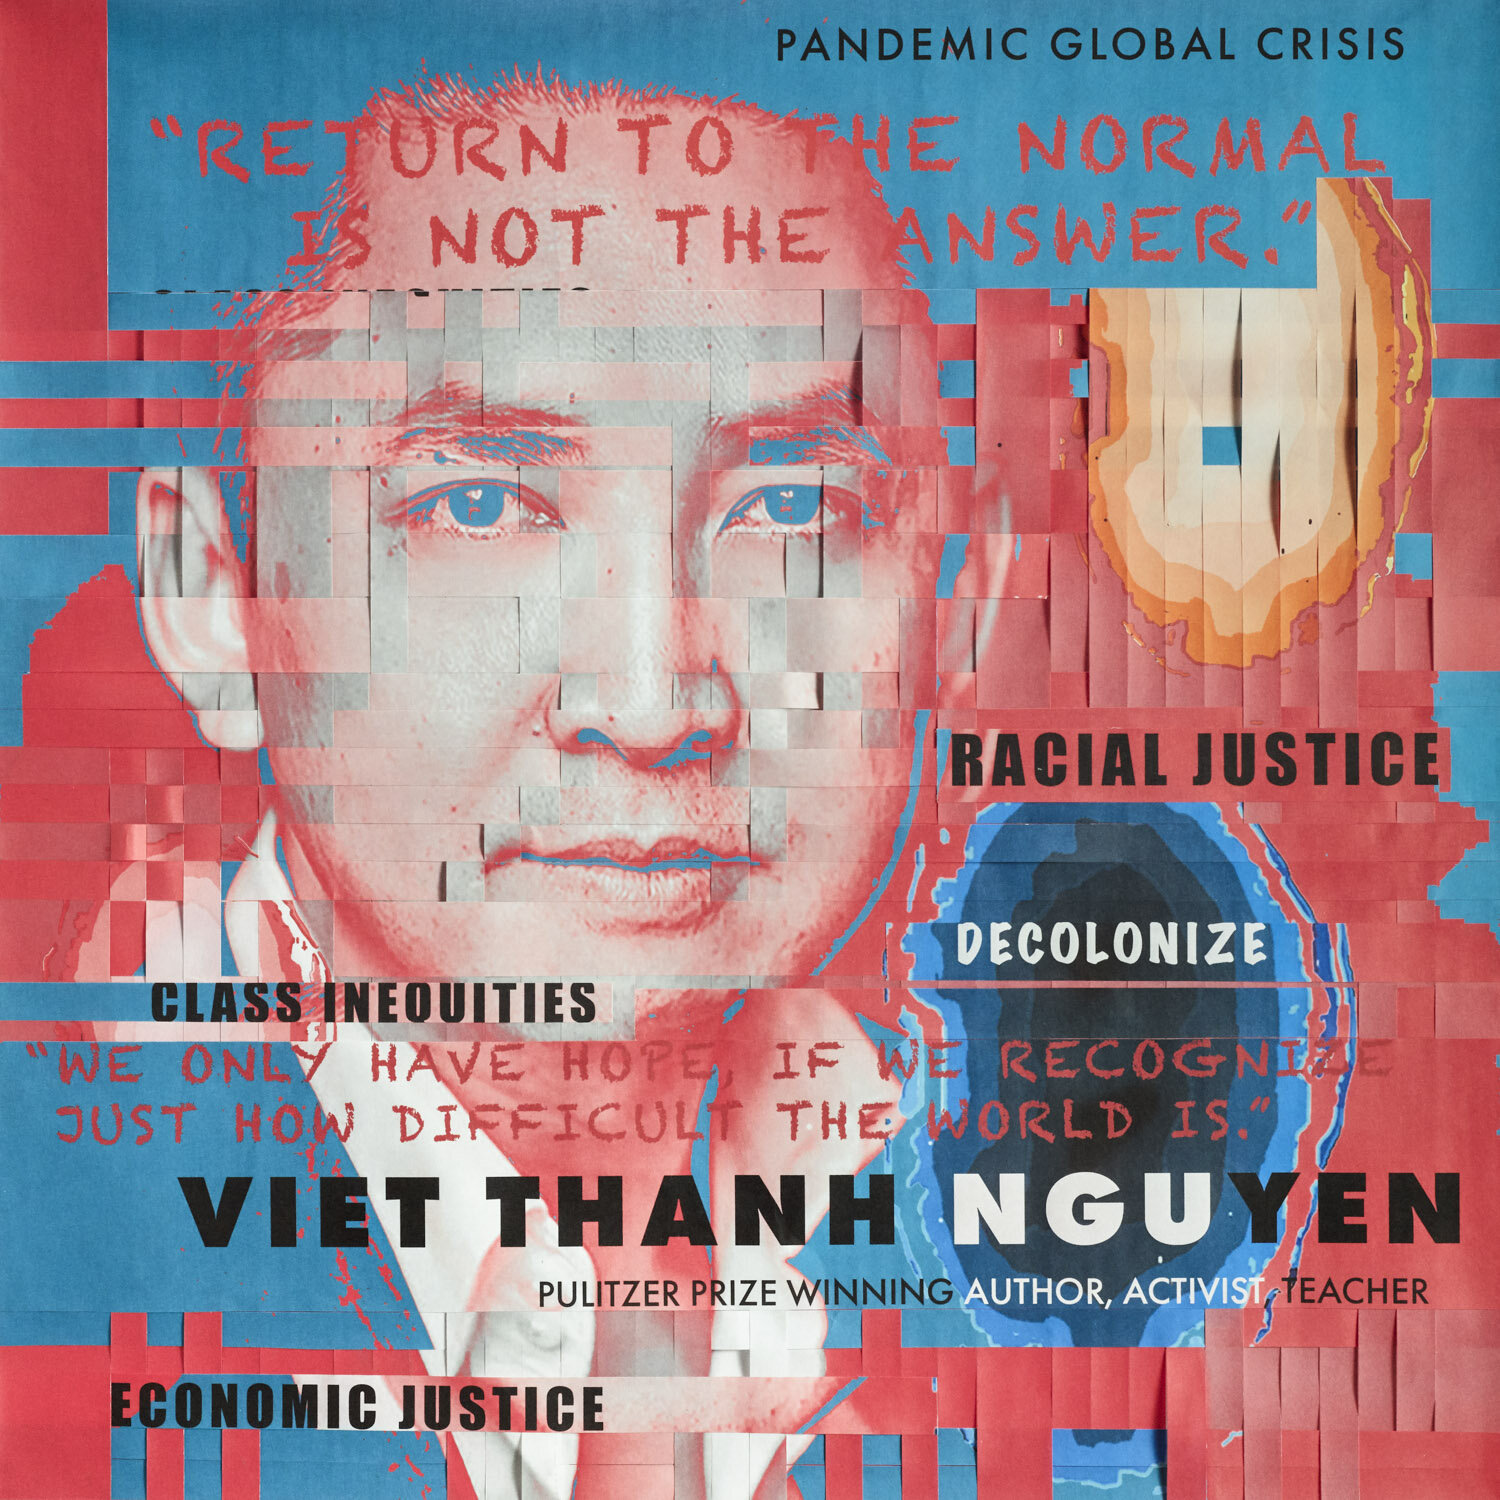 Day 72: Viet Thanh Nguyen